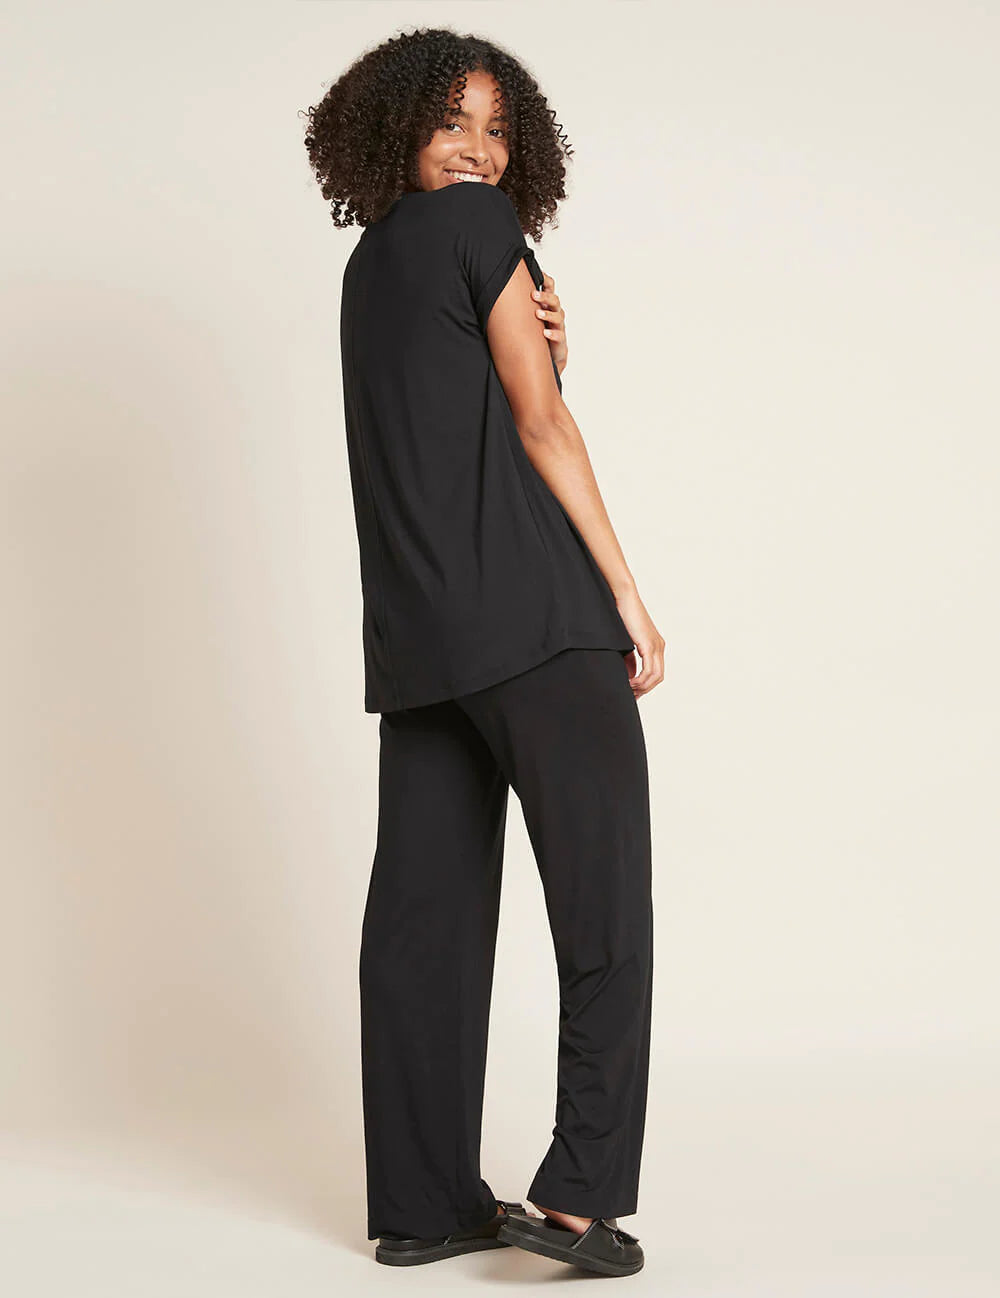 Downtime Lounge Pants, Lounge Pants For Women, Boody